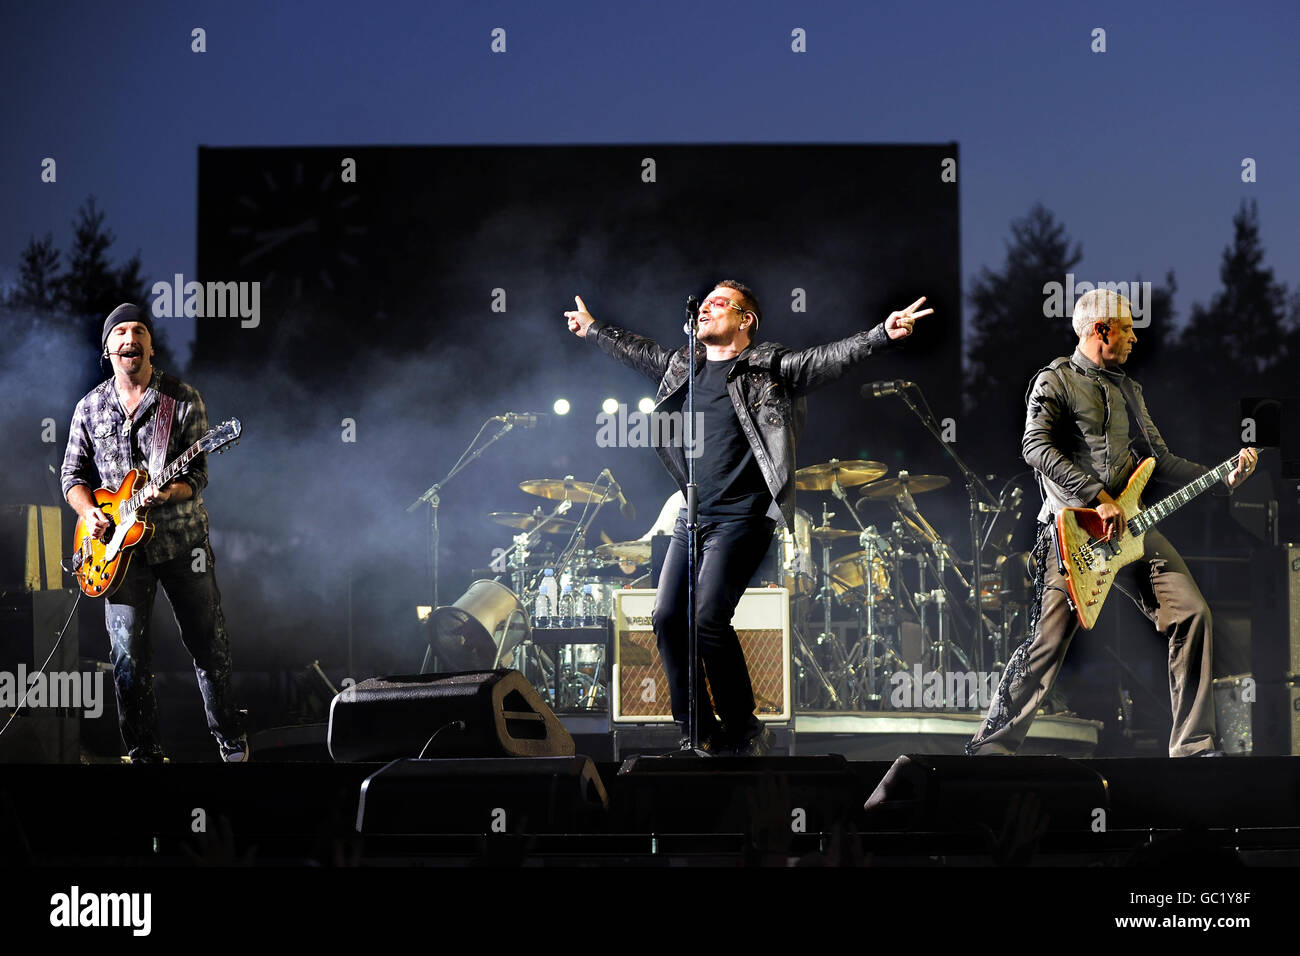 Left to right. The Edge, Bono and Adam Clayton of U2 perform live at the Don Valley Stadium in Sheffield as part of their 360 Tour. Stock Photo